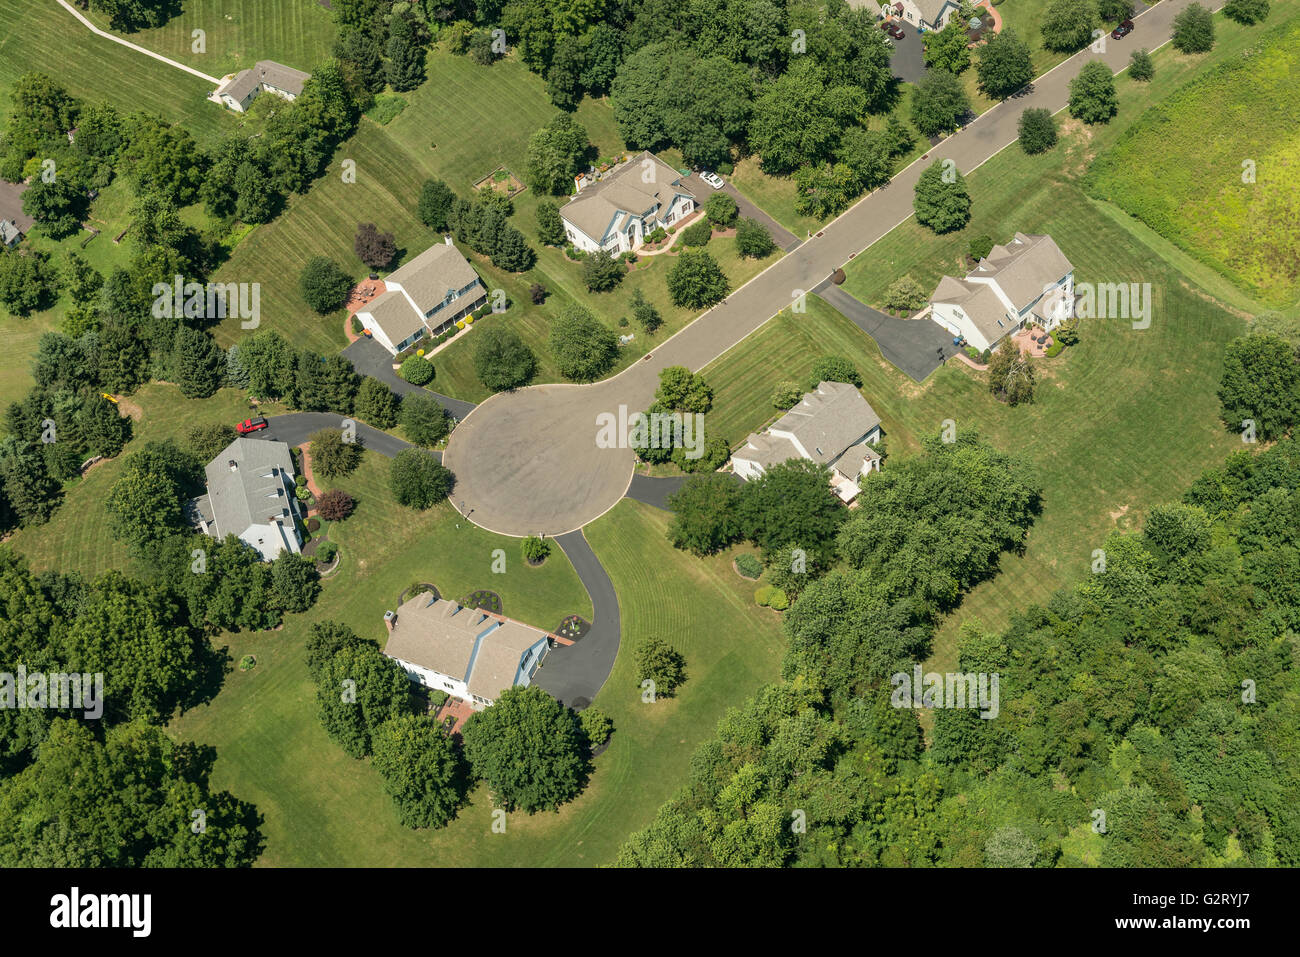 Aerial View Of Residential Houses In Suburban Cul De Sac Neighborhood, New Jersey, USA Stock Photo